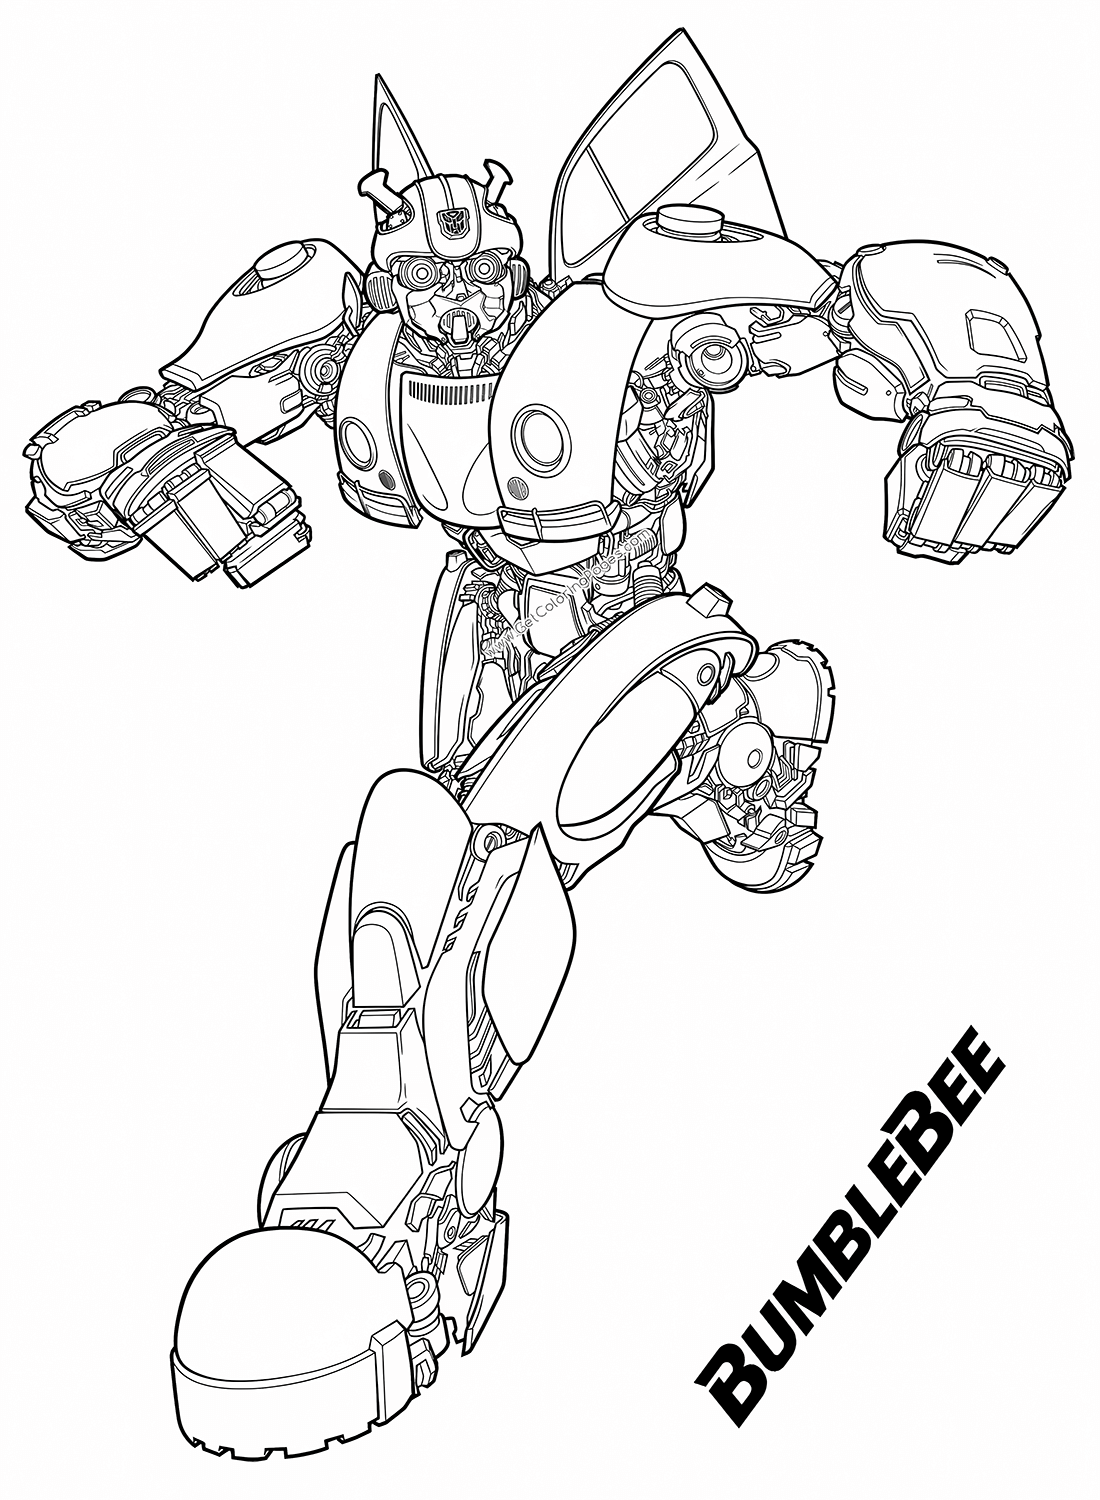 Autobot Bumblebee Coloring Page - Free Printable Coloring Pages